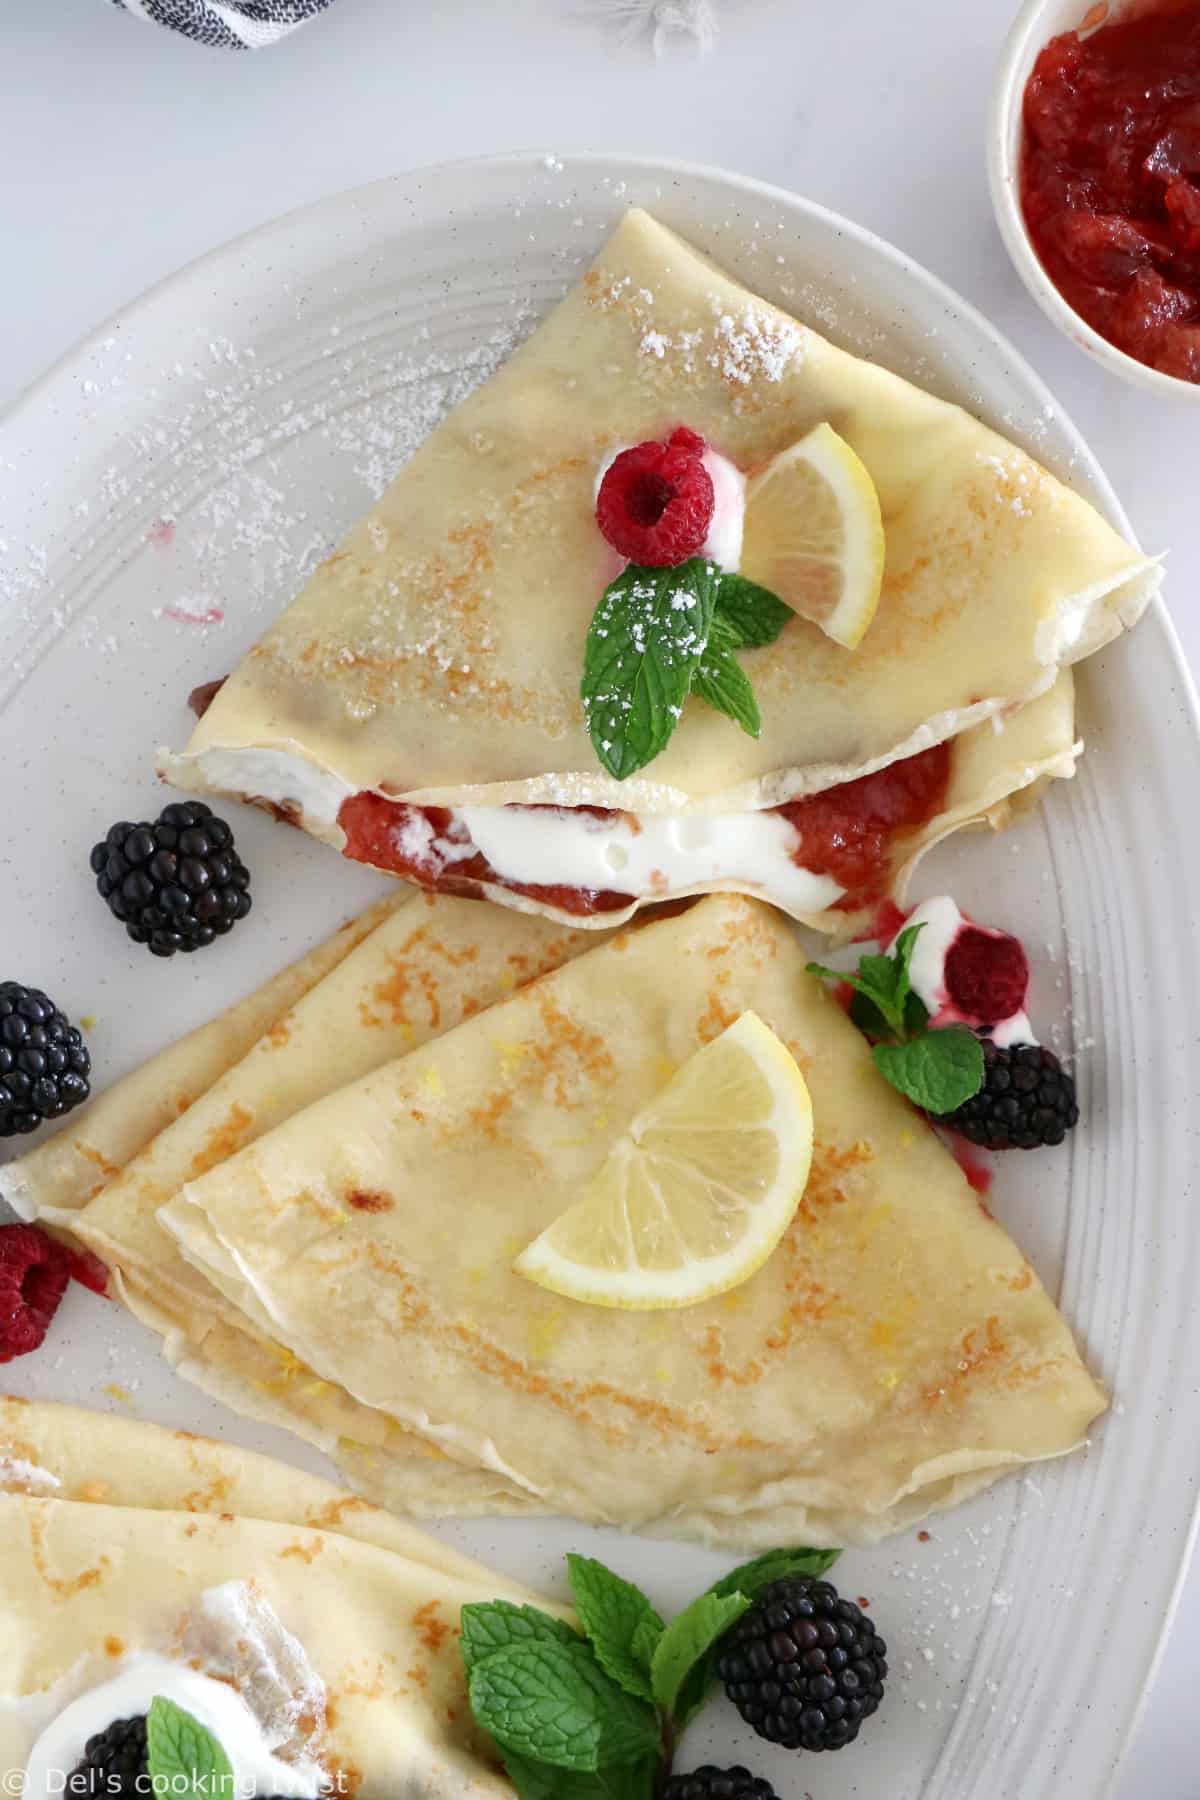 Best Crepe Filling Ideas (31+ Tasty, Sweet & Savory Fillings For Crepes!)